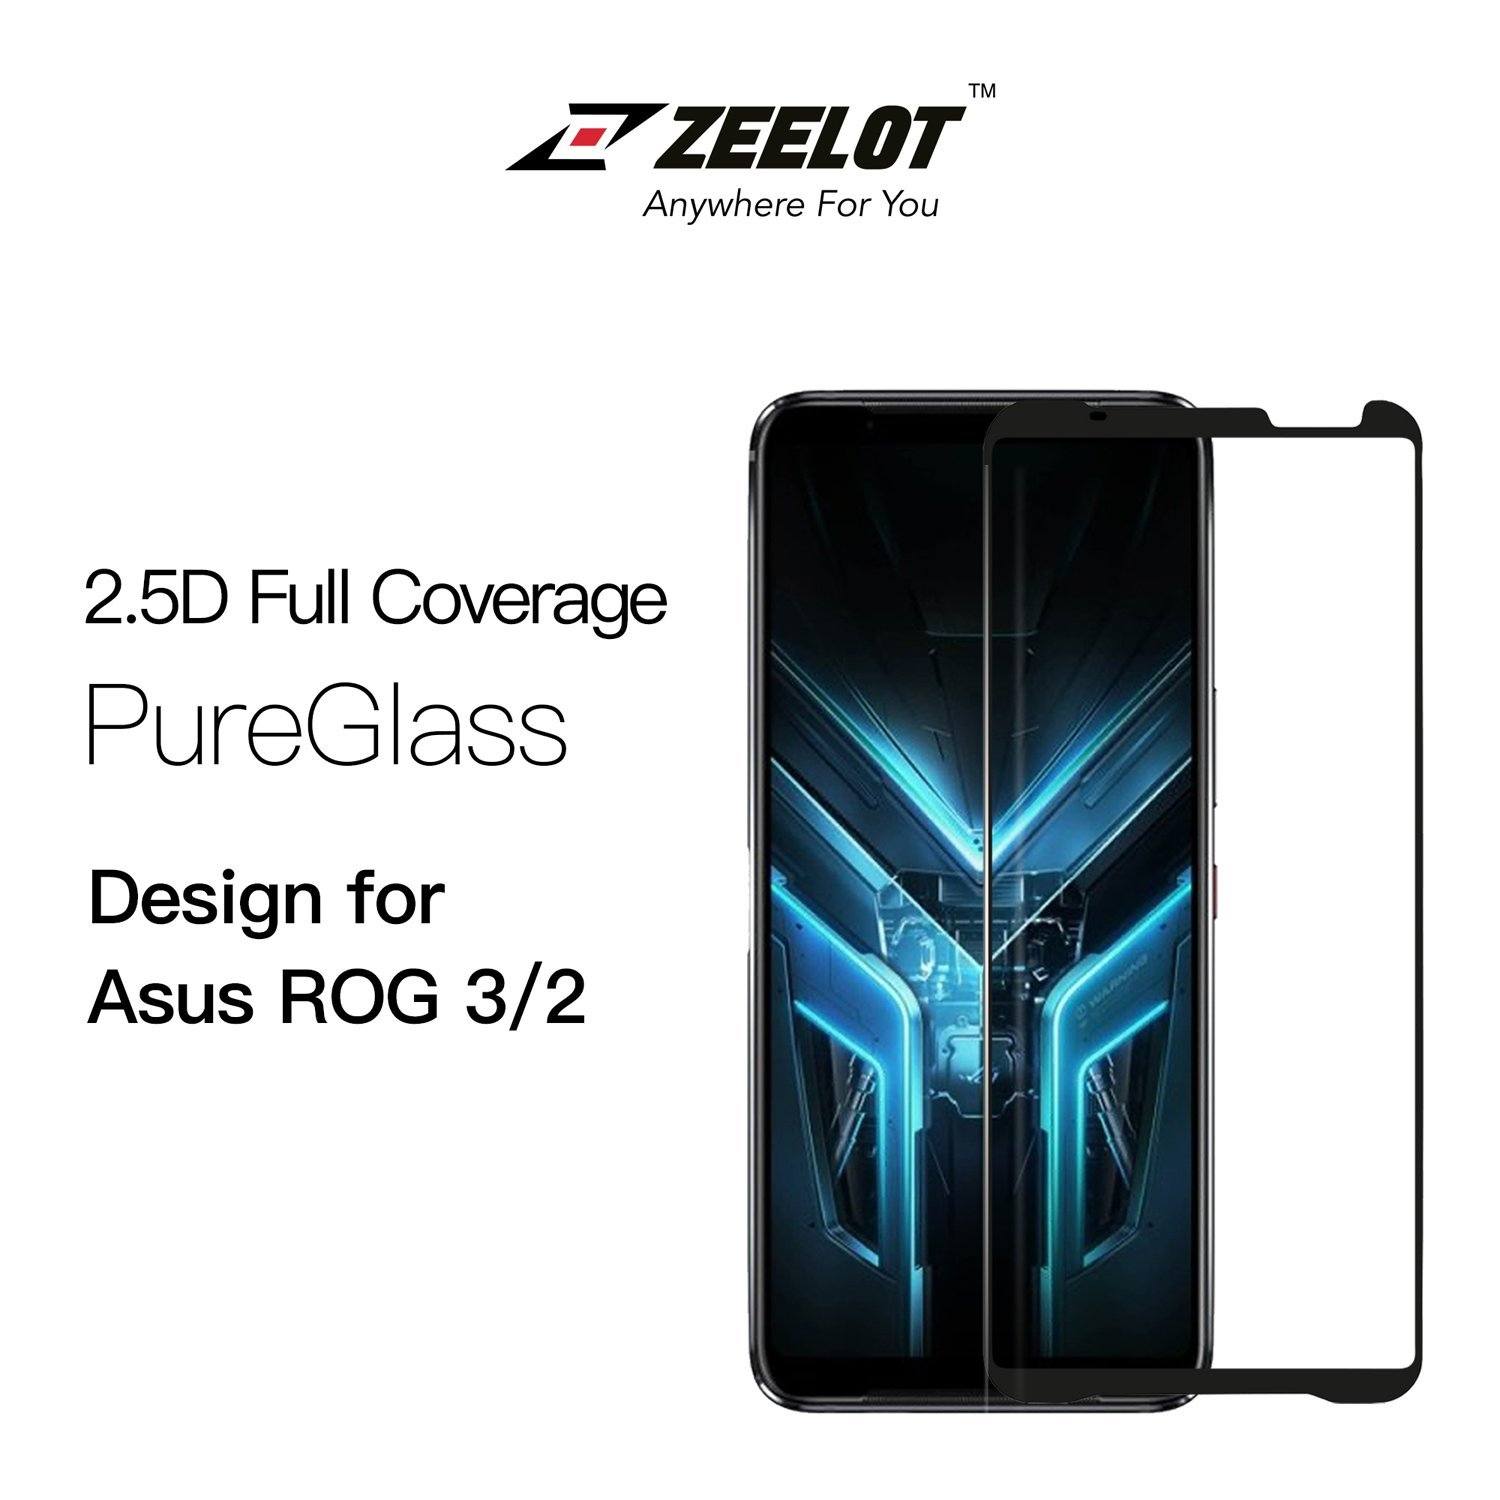 ZEELOT PureGlass 2.5D Tempered Glass Screen Protector for Asus ROG 2/3, Clear Privacy Tempered Glass ZEELOT 